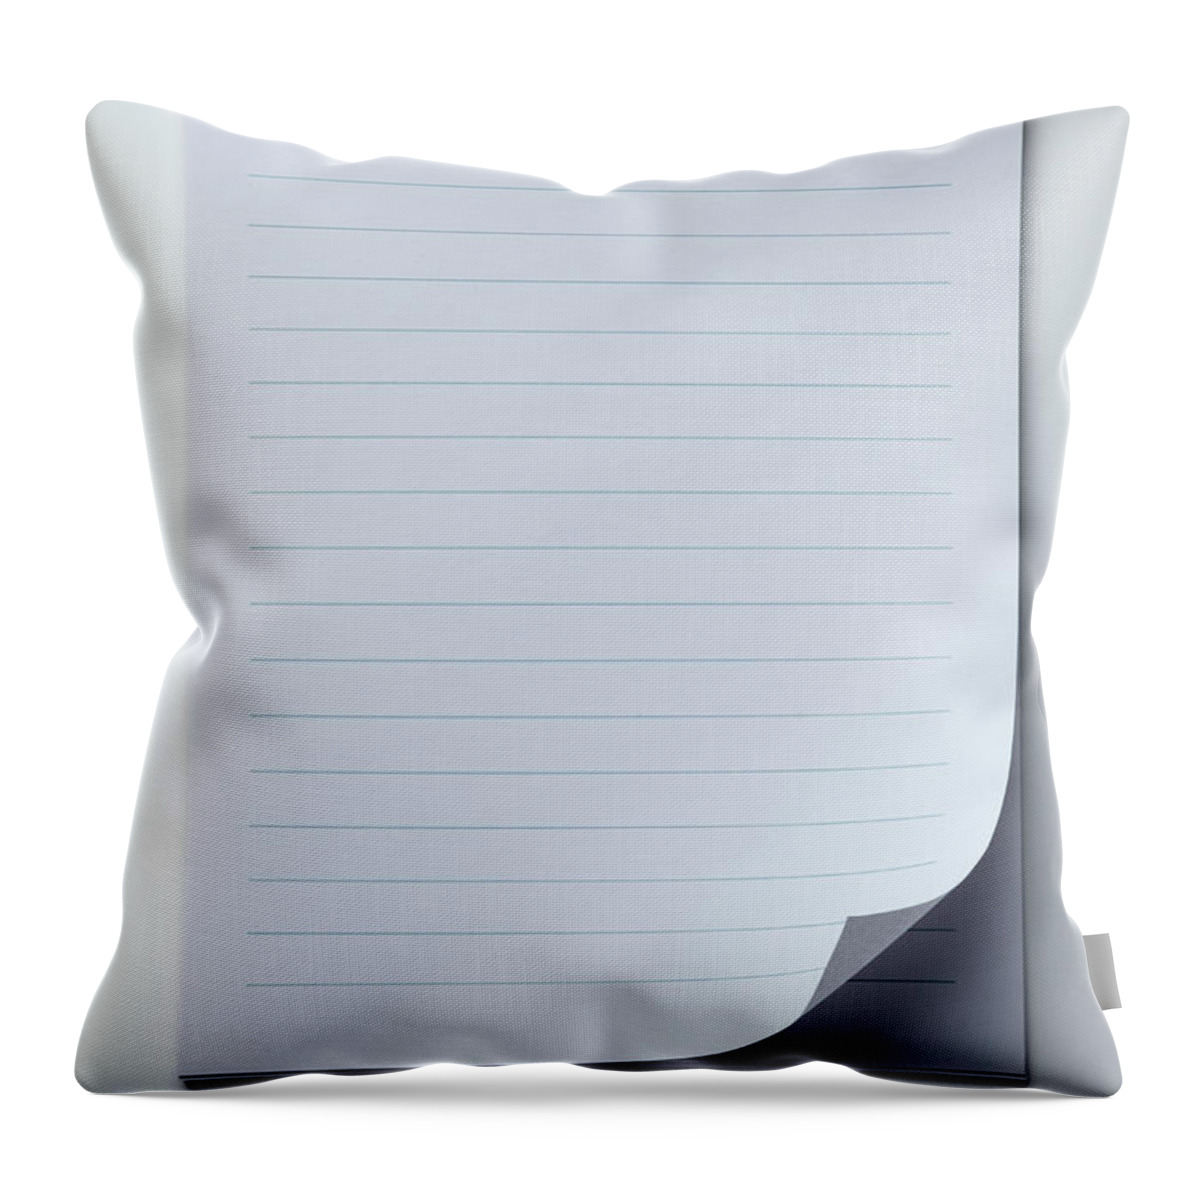 Shadow Throw Pillow featuring the photograph A Spiral Notepad With Lined Paper And A by Caspar Benson